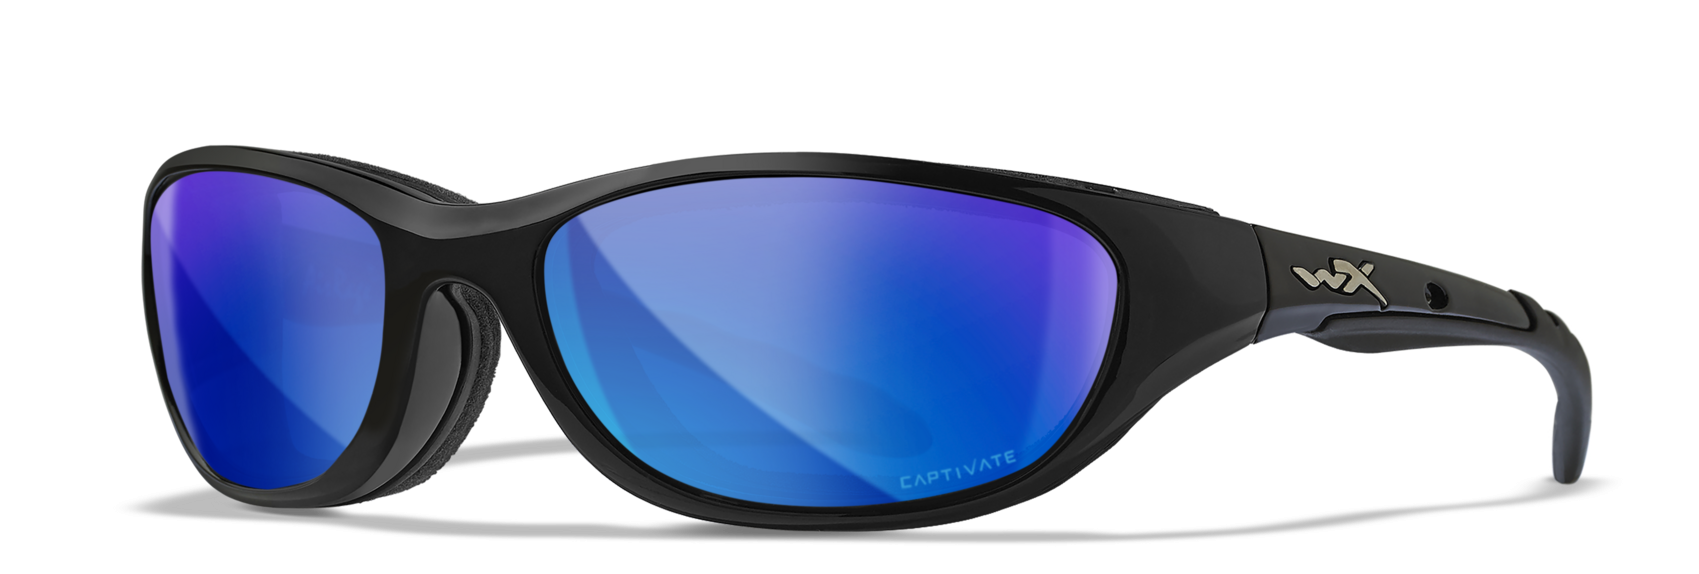 Wiley X Airrage Blue Mirror Polycarbonate Sunglasses